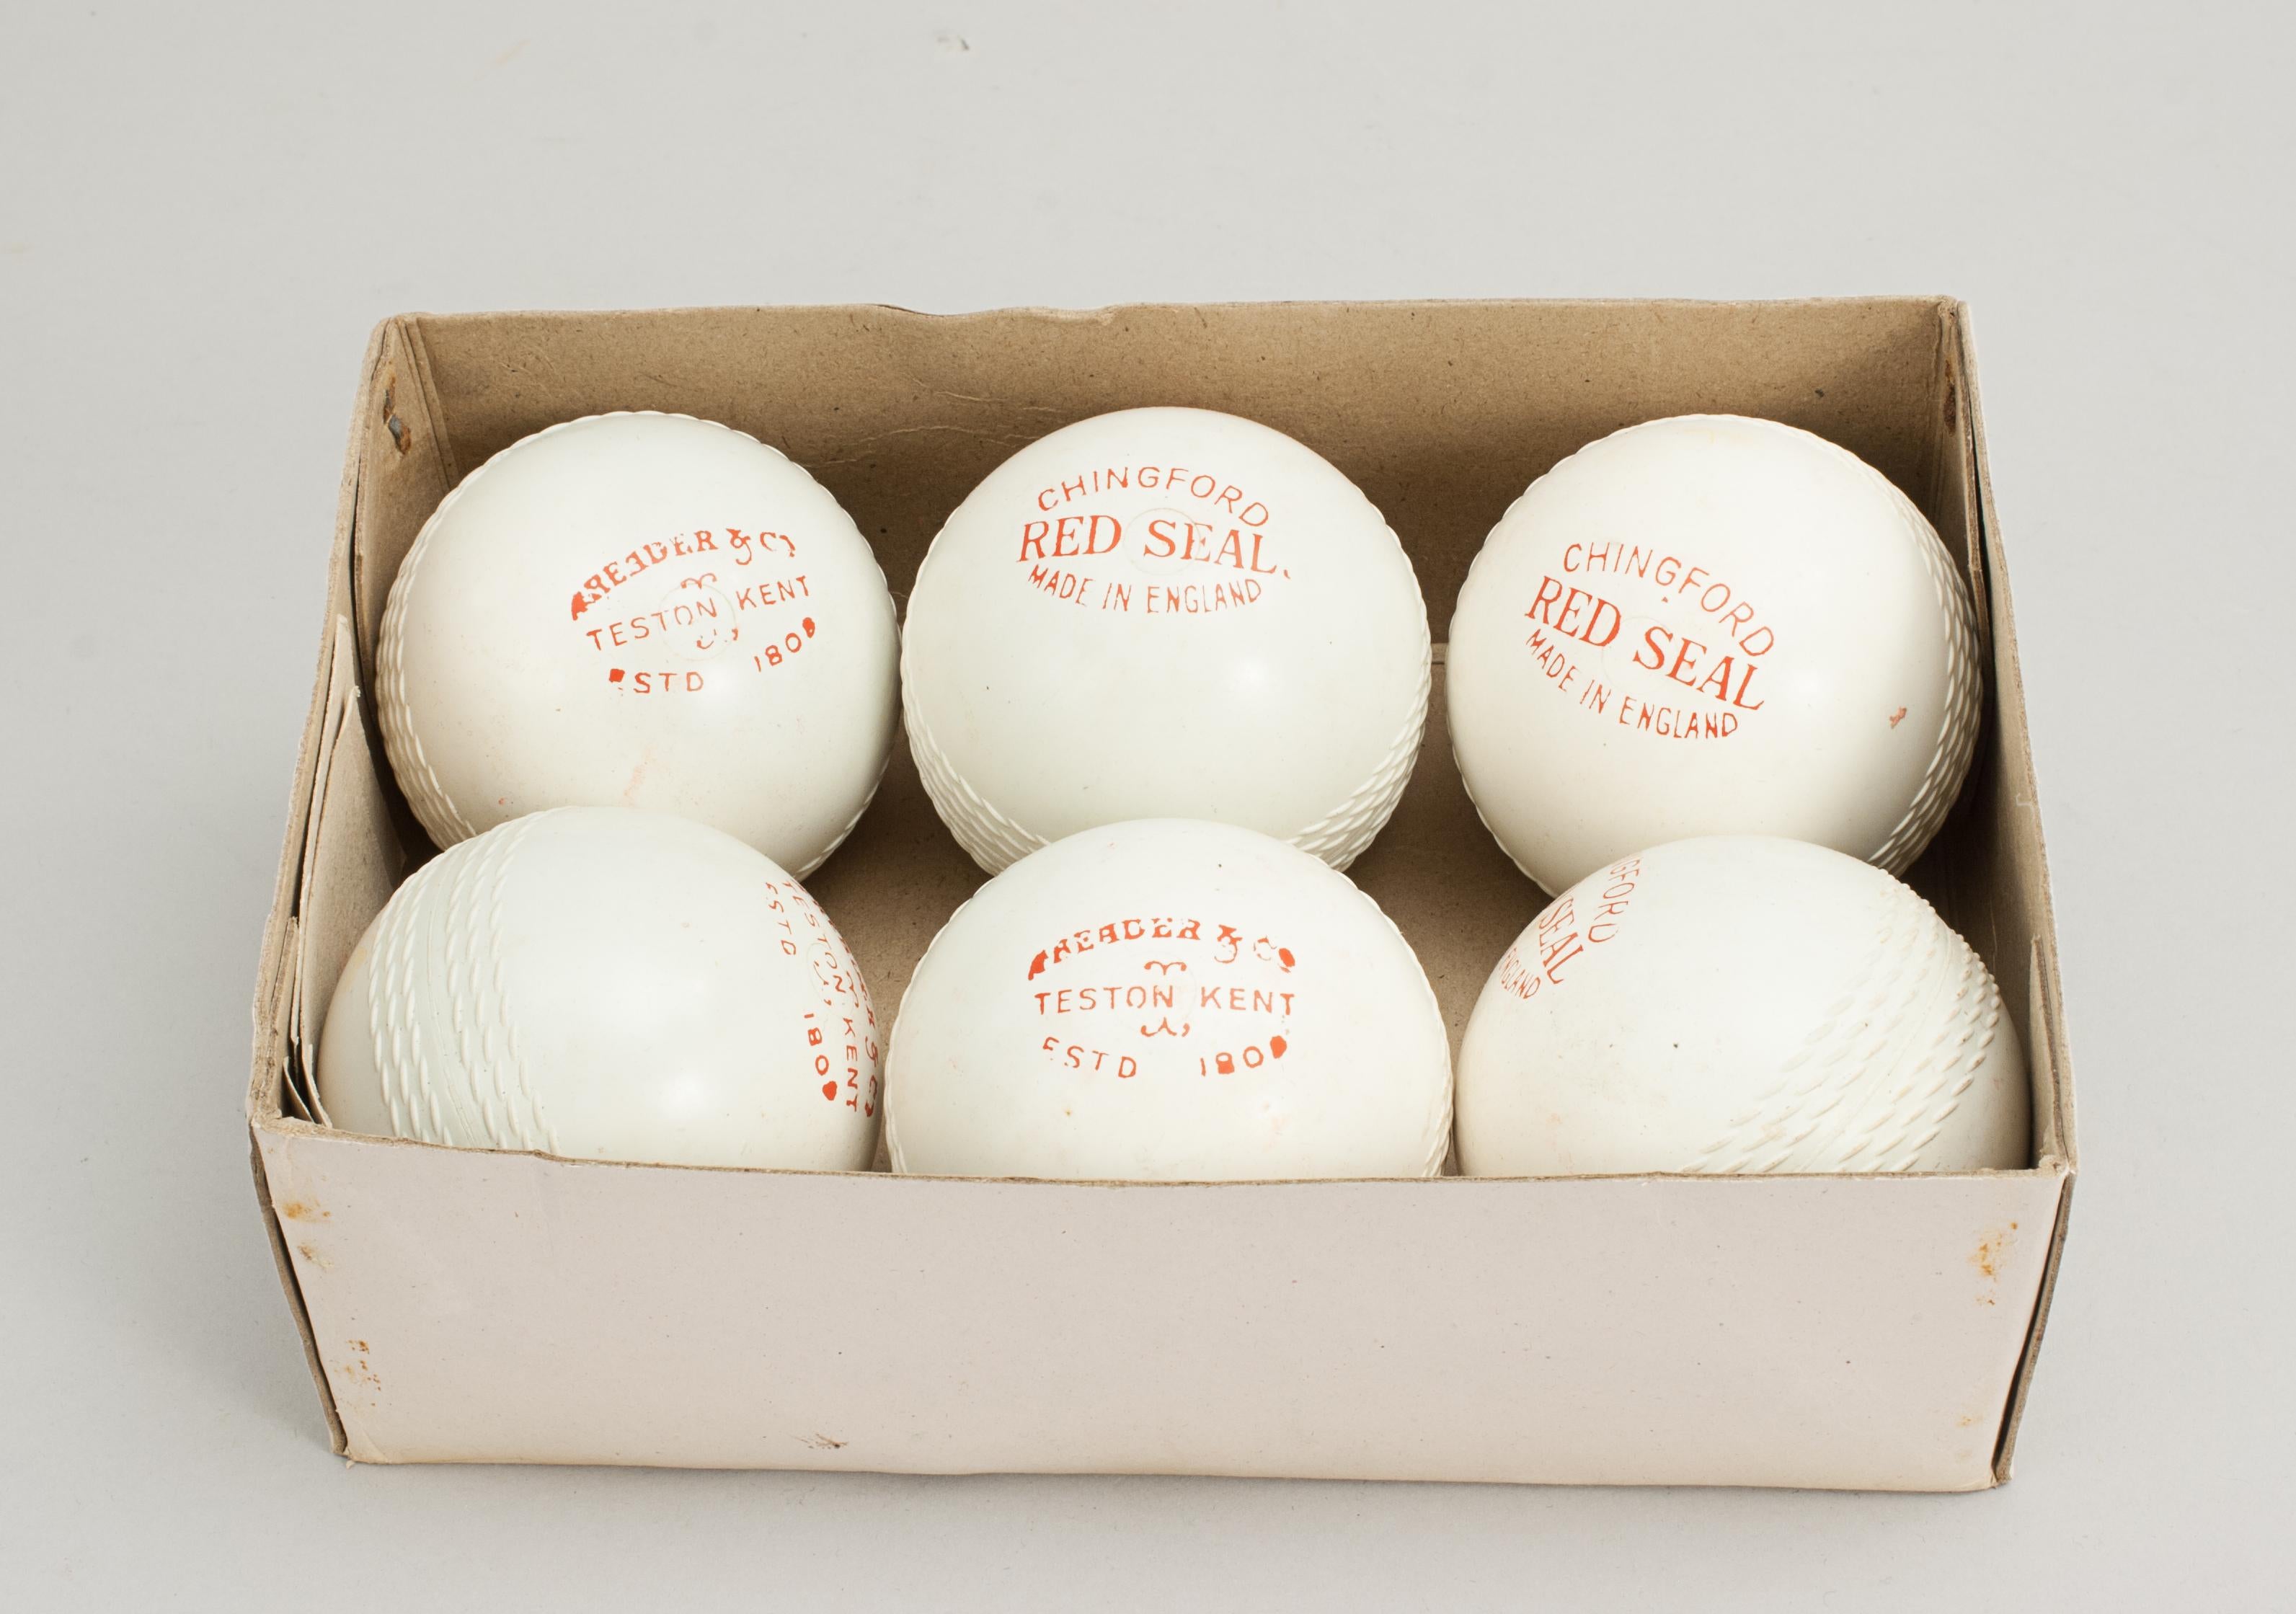 Chingford Red Seal Hockey Balls.
Six Chingford Red Seal hockey balls in excellent condition. The balls were retailed by A. Reader & Co., Teston Kent. According to 'Hockey News' in April 1964 in an advert for Chingford Red Seal hockey balls 'On all